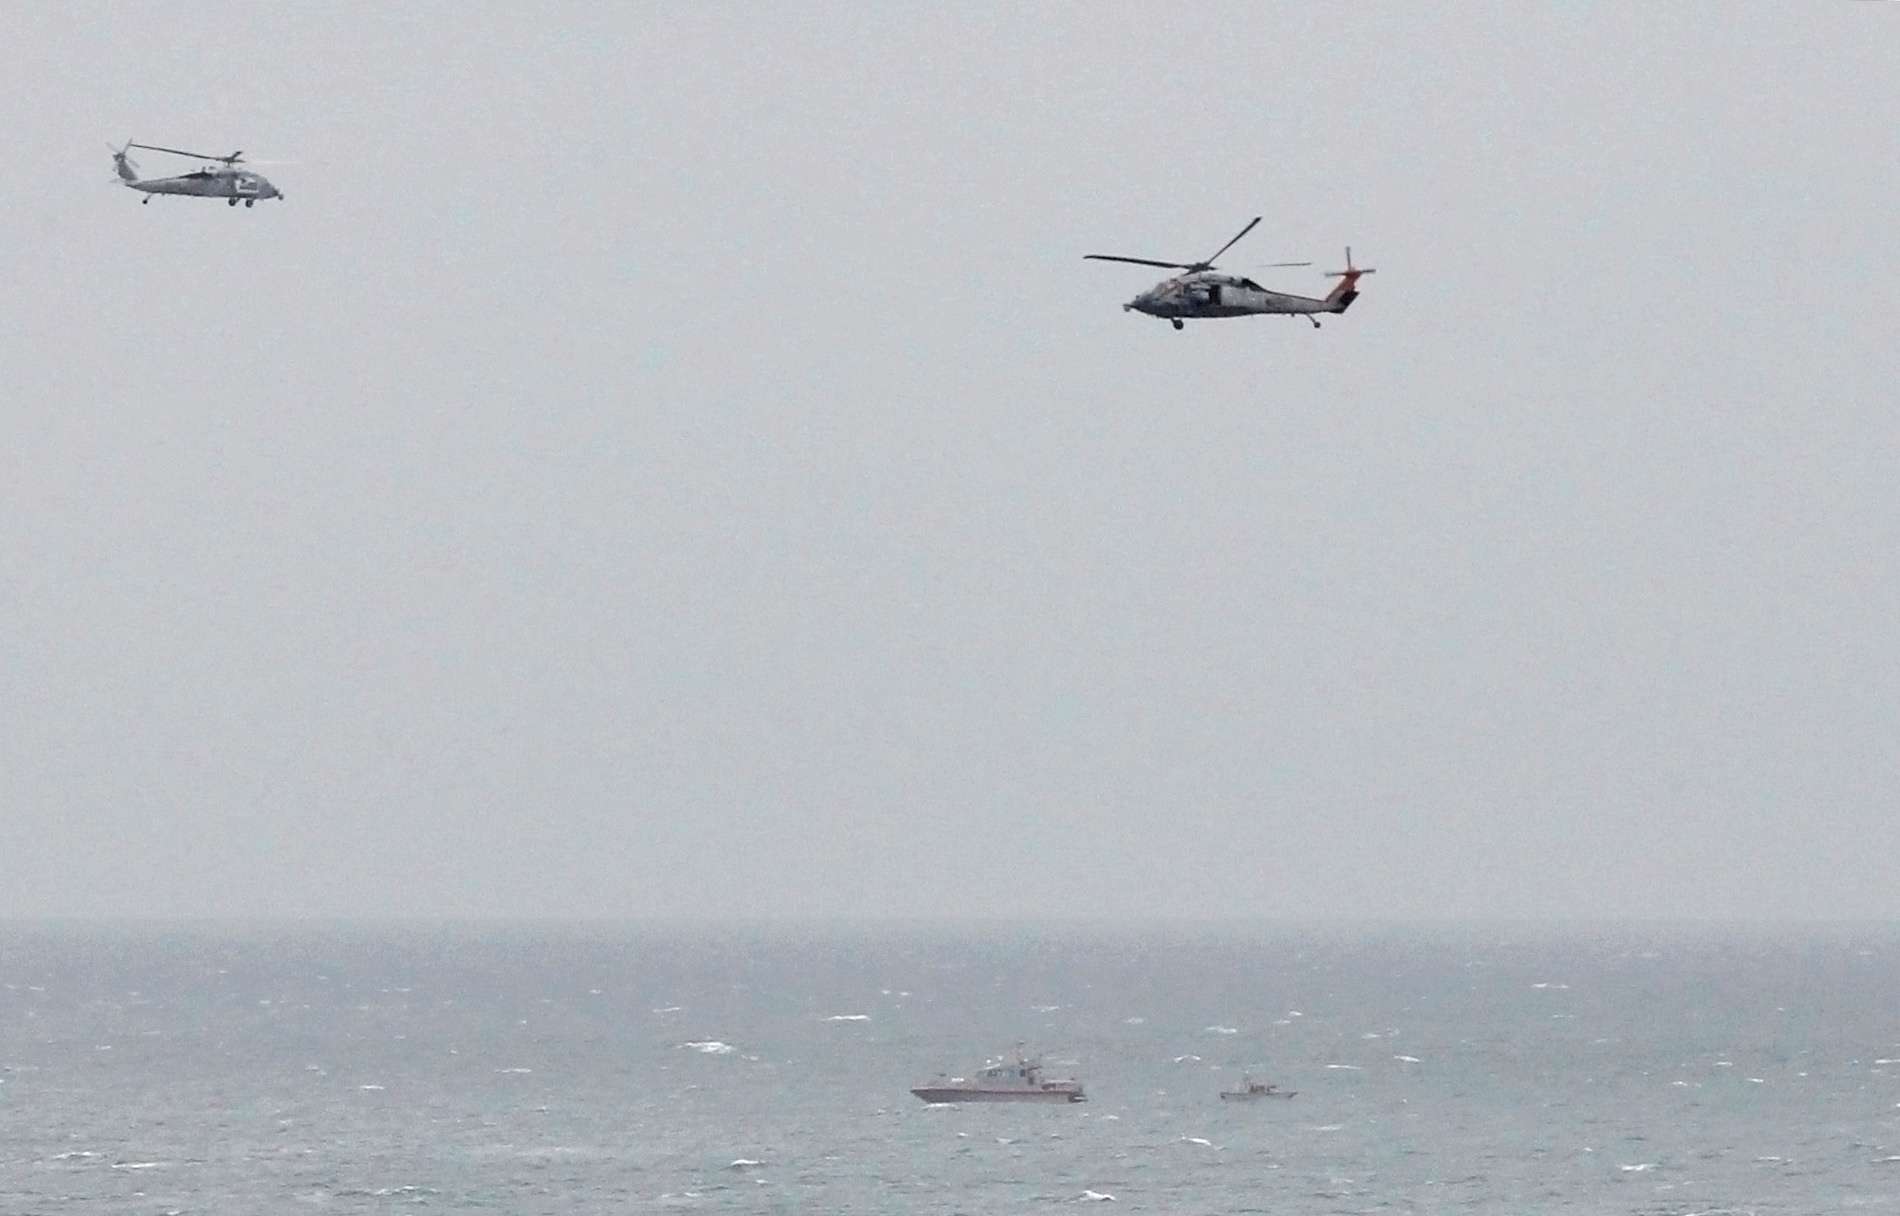 Iranian Revolutionary Guard boat is seen near the U.S. aircraft carrier USS George H. W. Bush in the Strait of Hormuz as U.S. Navy helicopters hover nearby